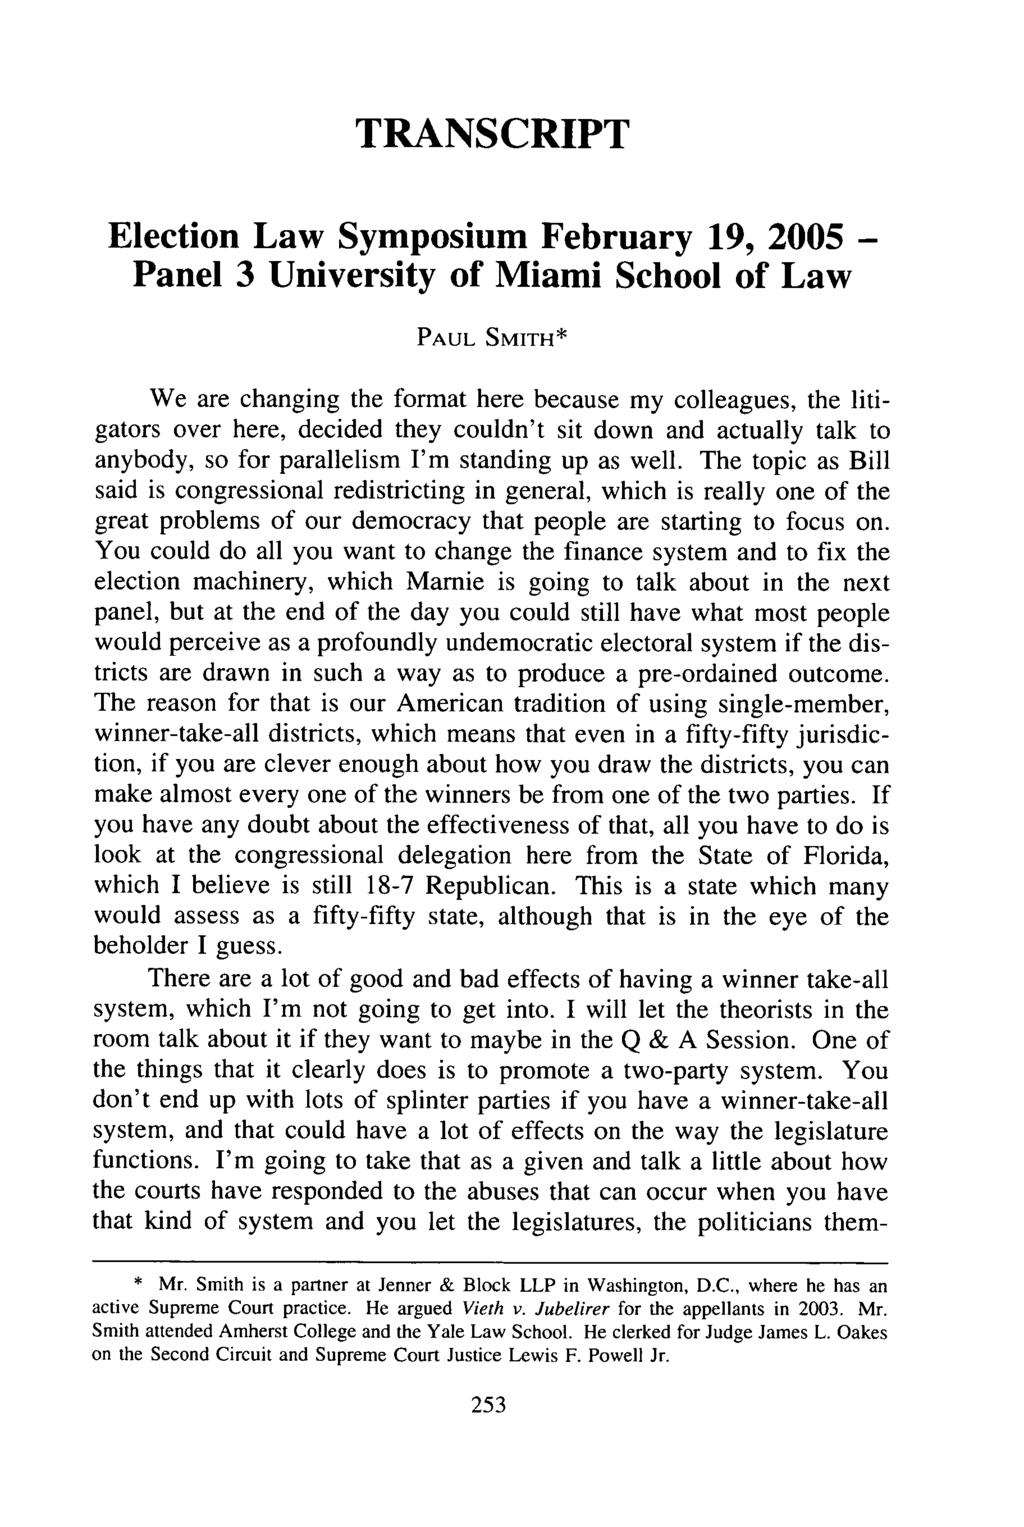 TRANSCRIPT Election Law Symposium February 19, 2005 - Panel 3 University of Miami School of Law PAUL SMITH* We are changing the format here because my colleagues, the litigators over here, decided